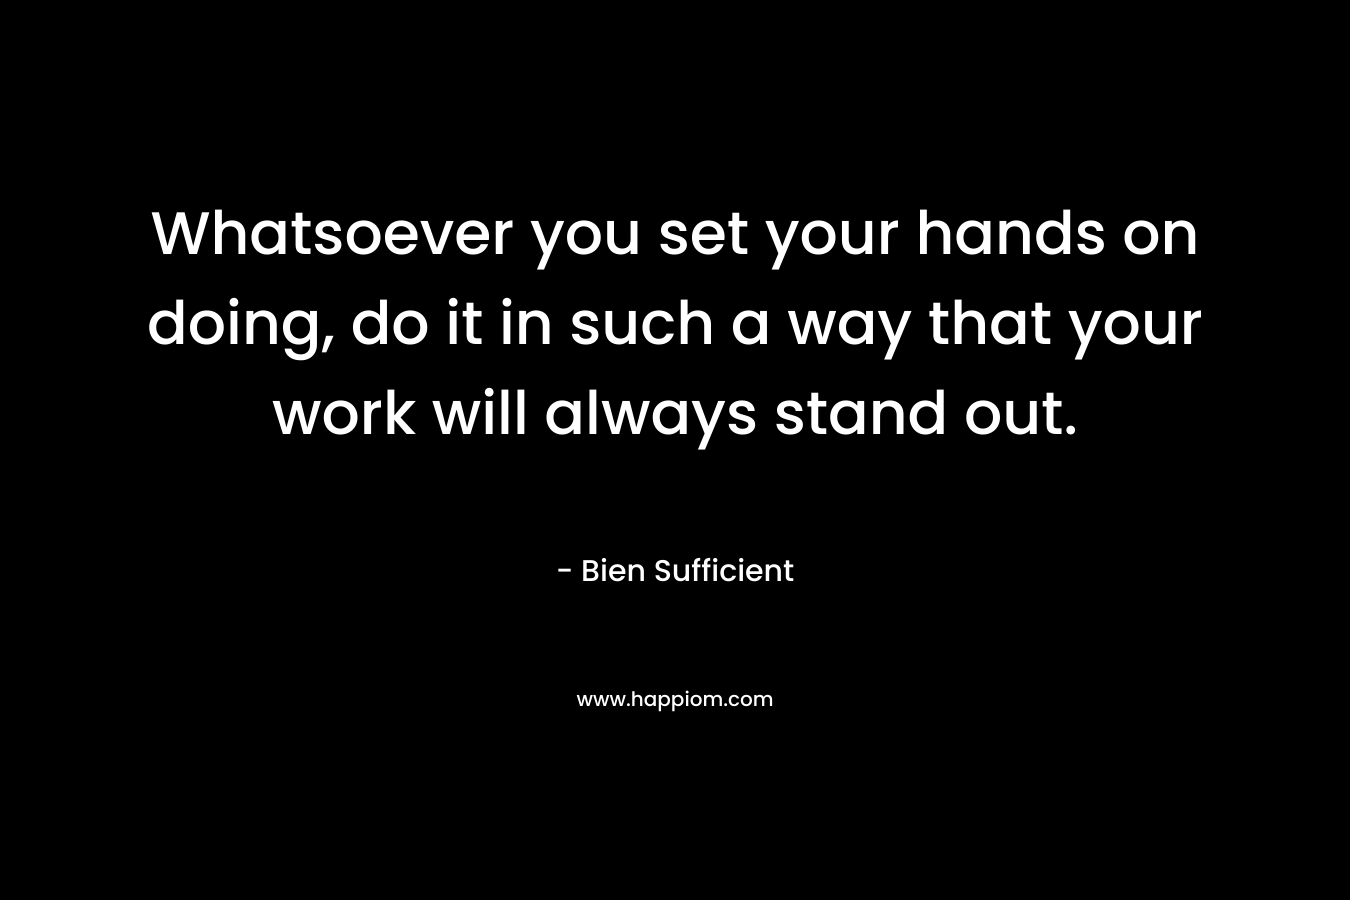 Whatsoever you set your hands on doing, do it in such a way that your work will always stand out. – Bien Sufficient